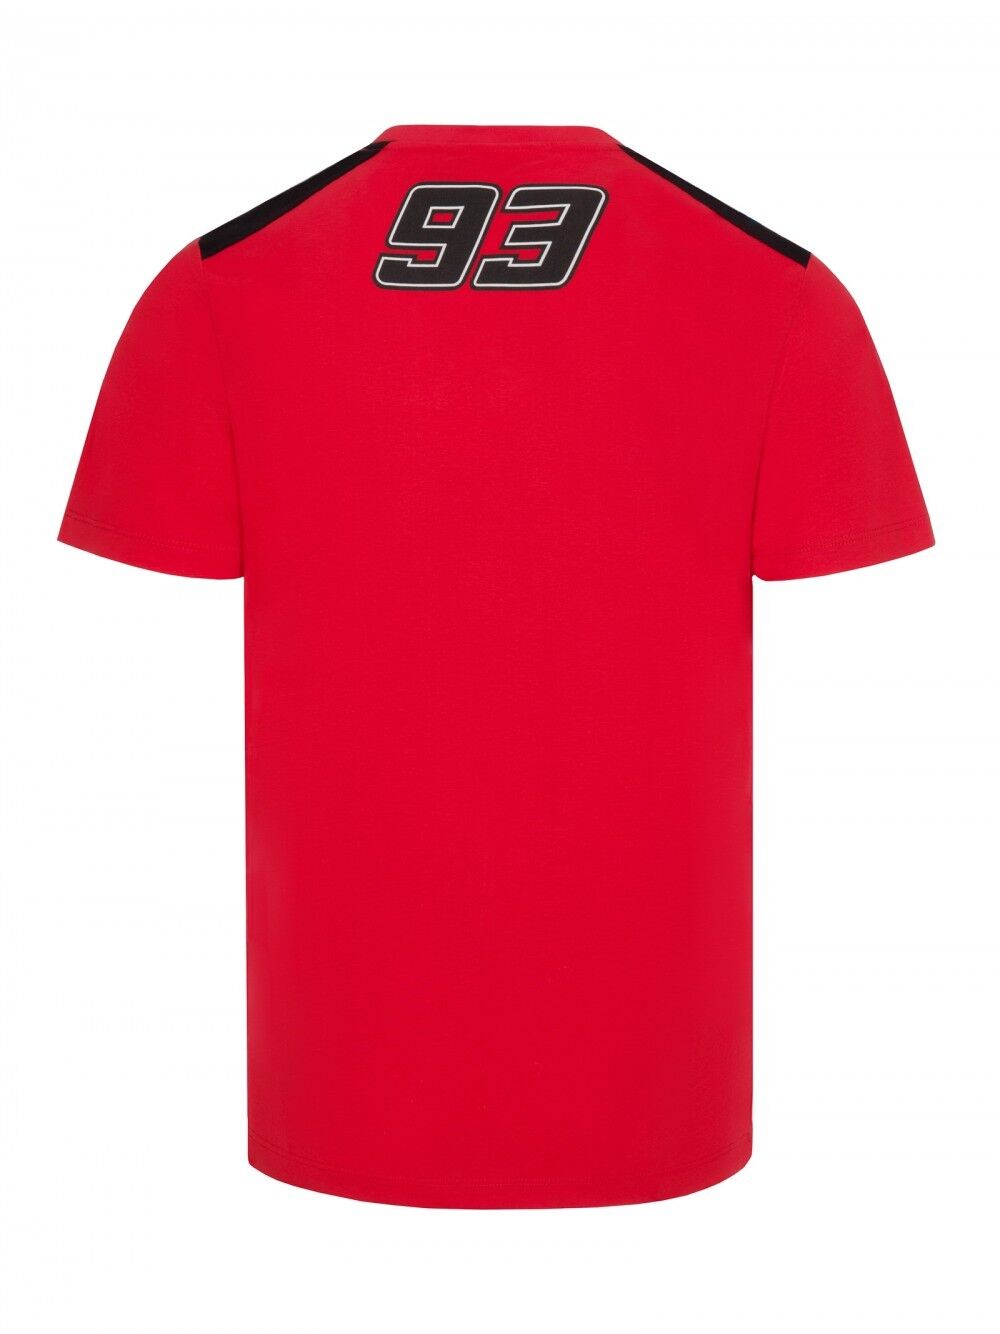 Marc Marquez Official 93 Red Ant T-Shirt - 17 33006